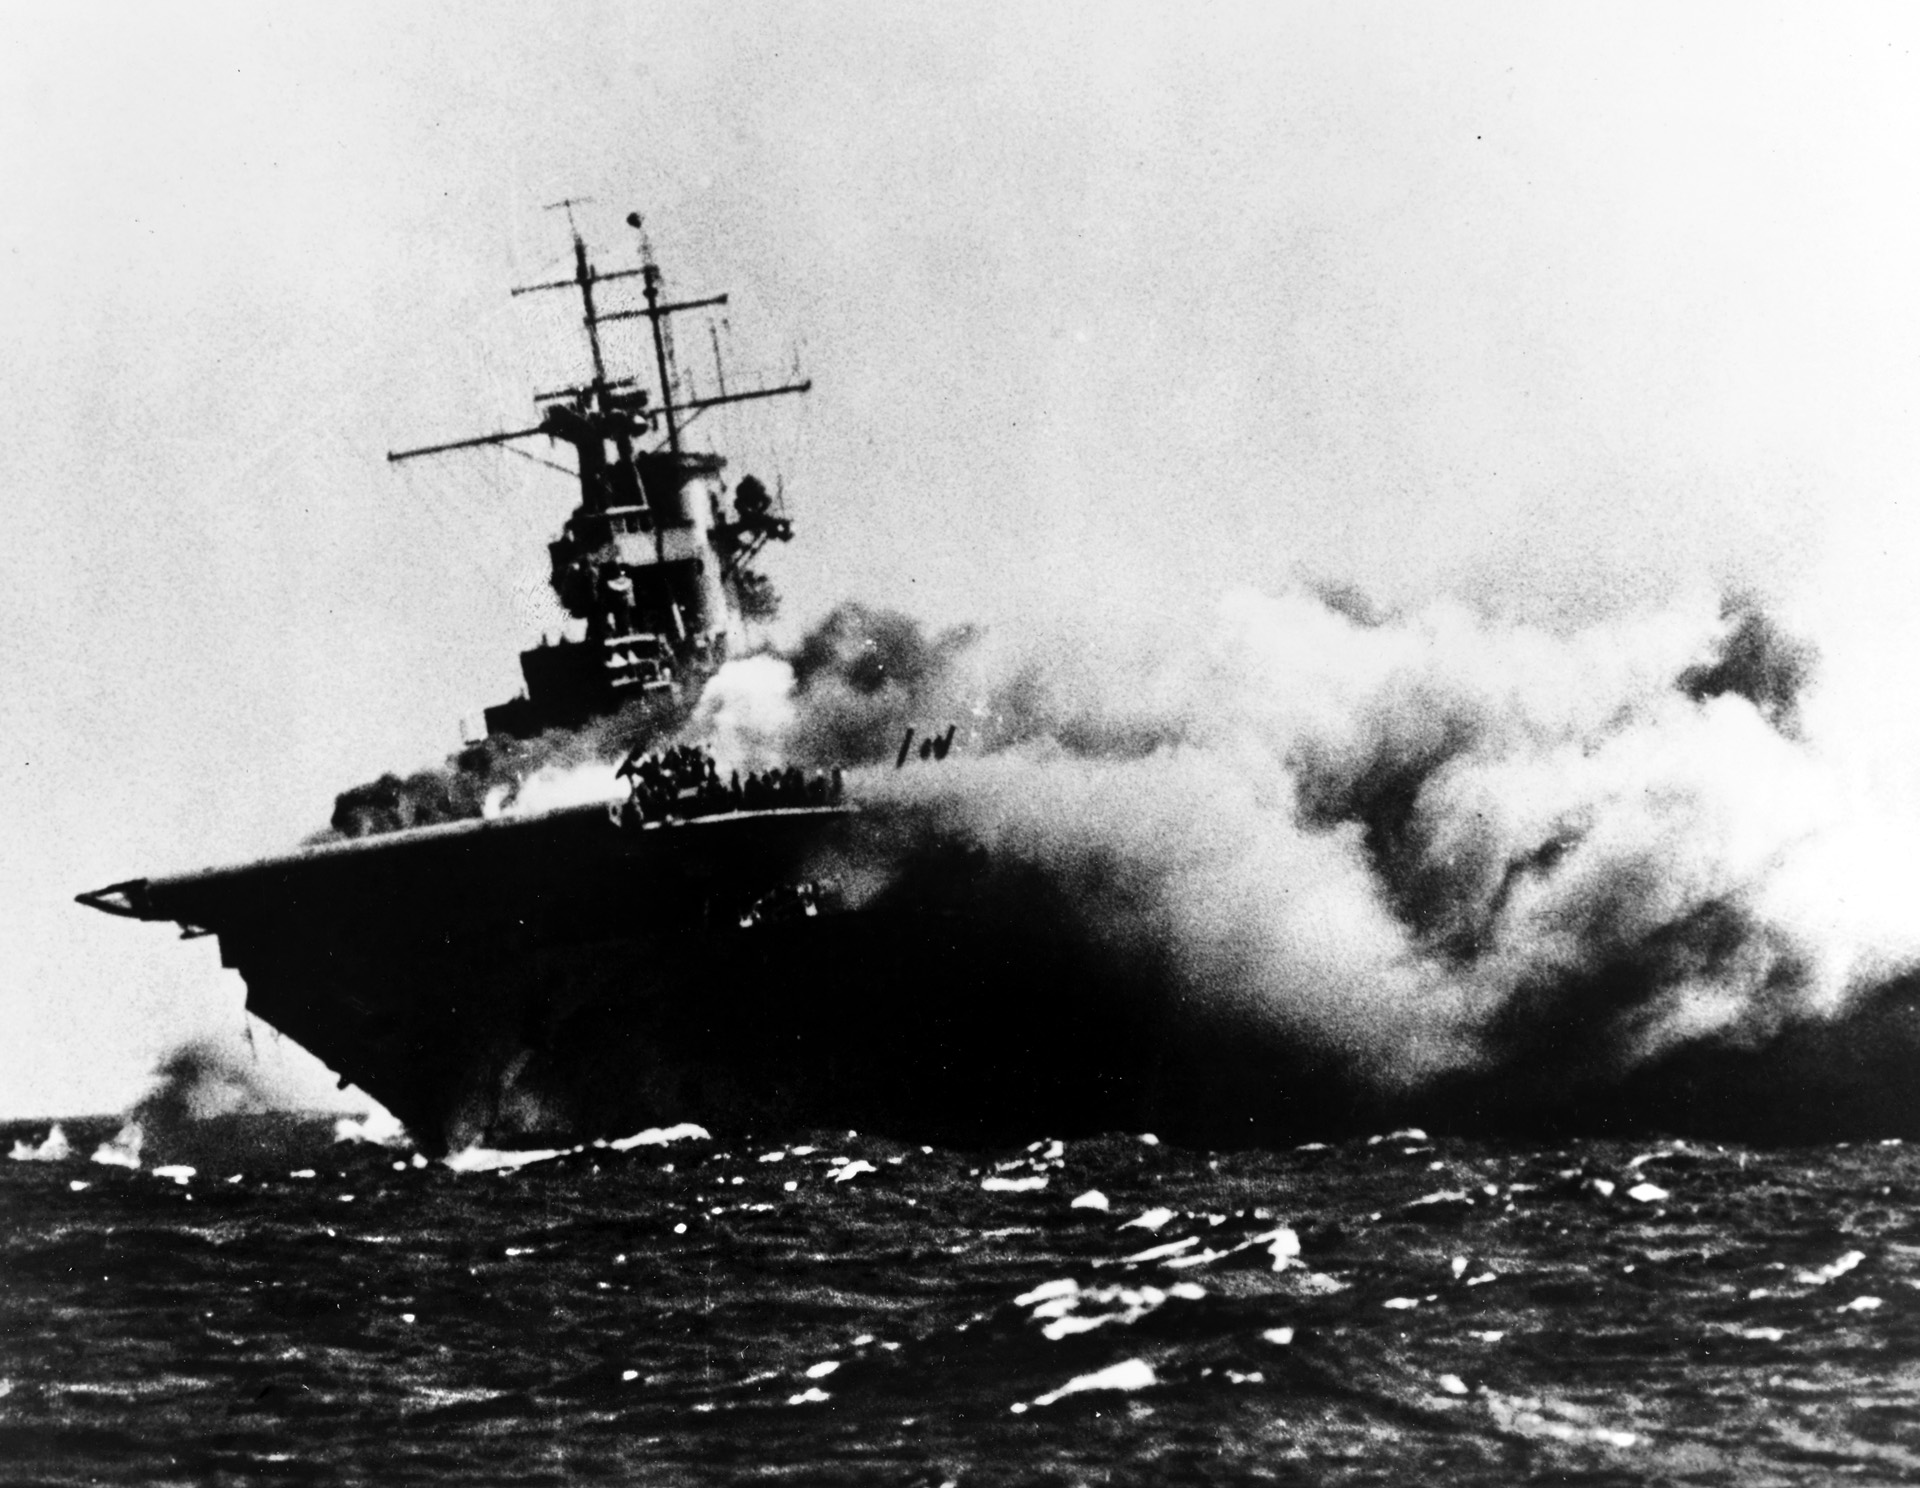 Sailors can be seen preparing to abandon ship at the bow of Wasp as she burns fiercely on September 15, 1942. A total of 171 officers and 1,798 enlisted men survived, while 25 officers and 150 men lost their lives.